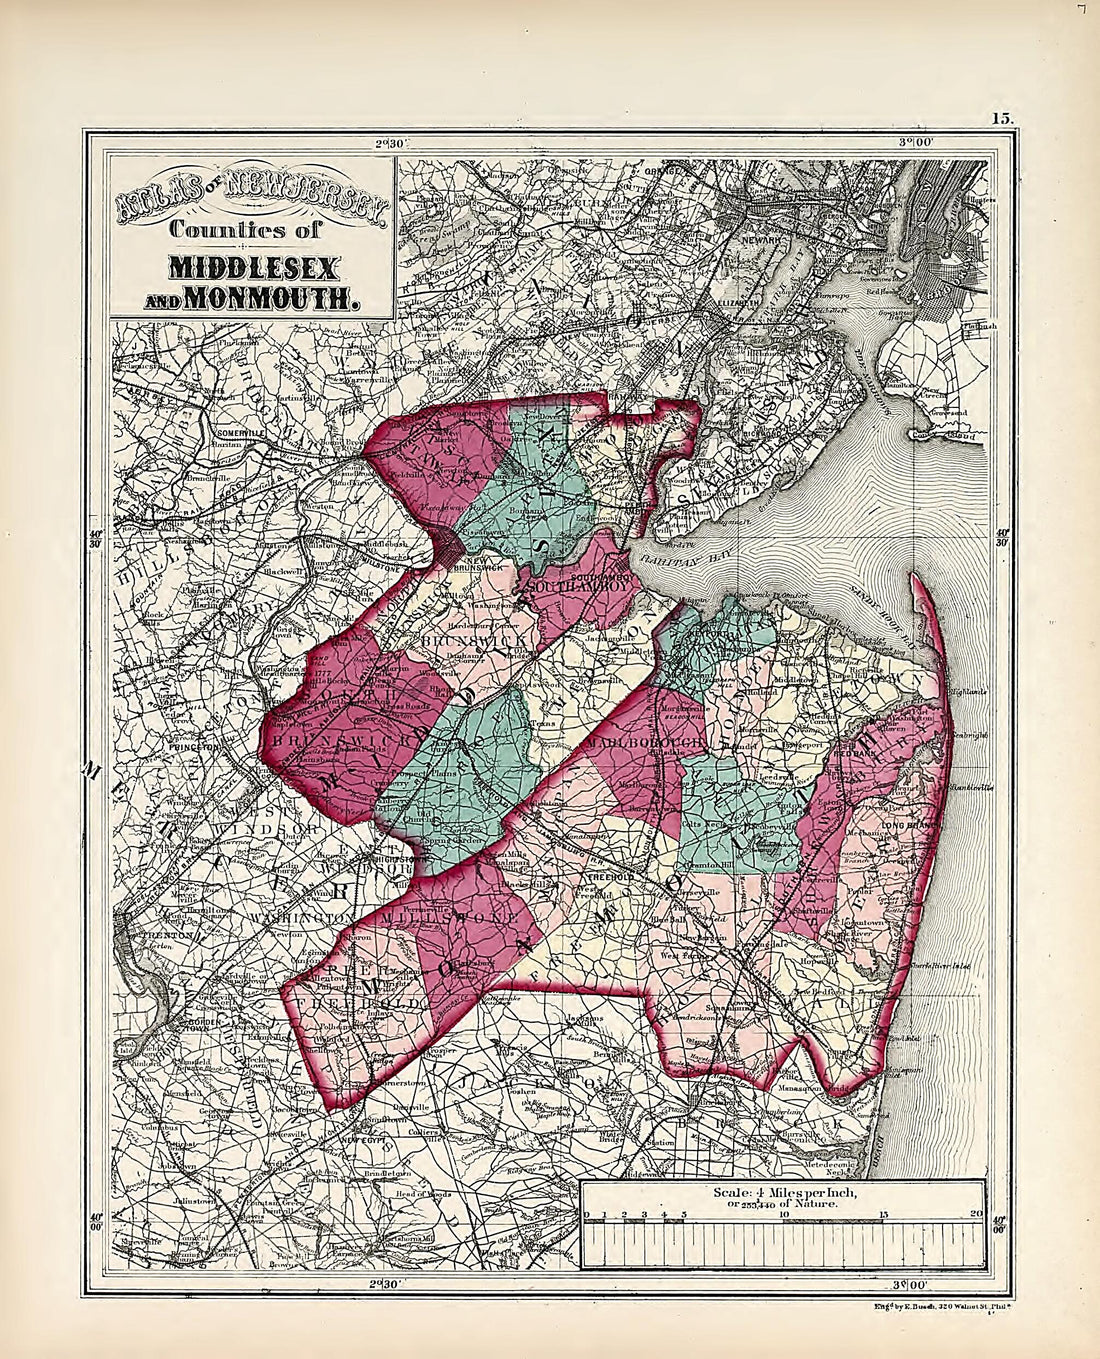 This old map of Counties of Middlesex and Monmouth from Atlas of the Late Township of Greenville, and the State of New Jersey from 1873 was created by Griffith Morgan Hopkins in 1873